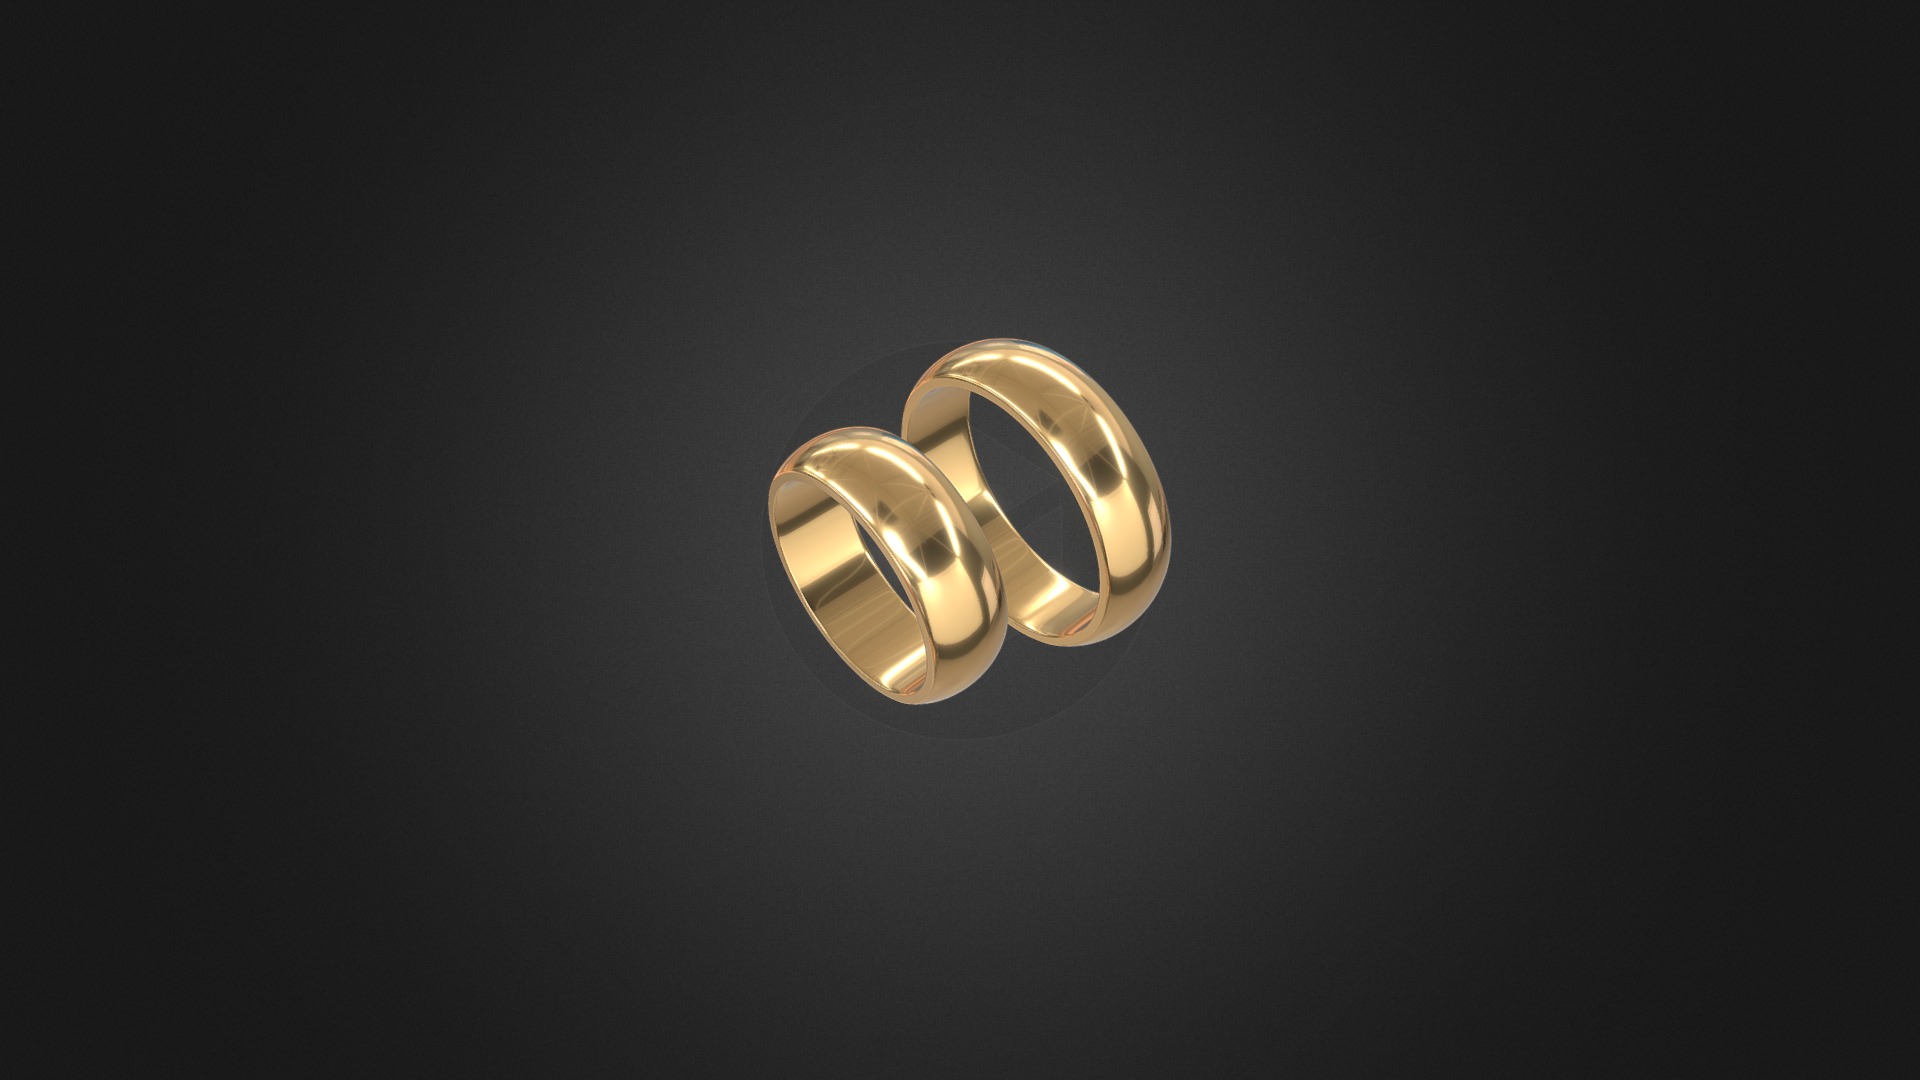 3D model 1083 – Rings - This is a 3D model of the 1083 - Rings. The 3D model is about a gold ring on a black background.